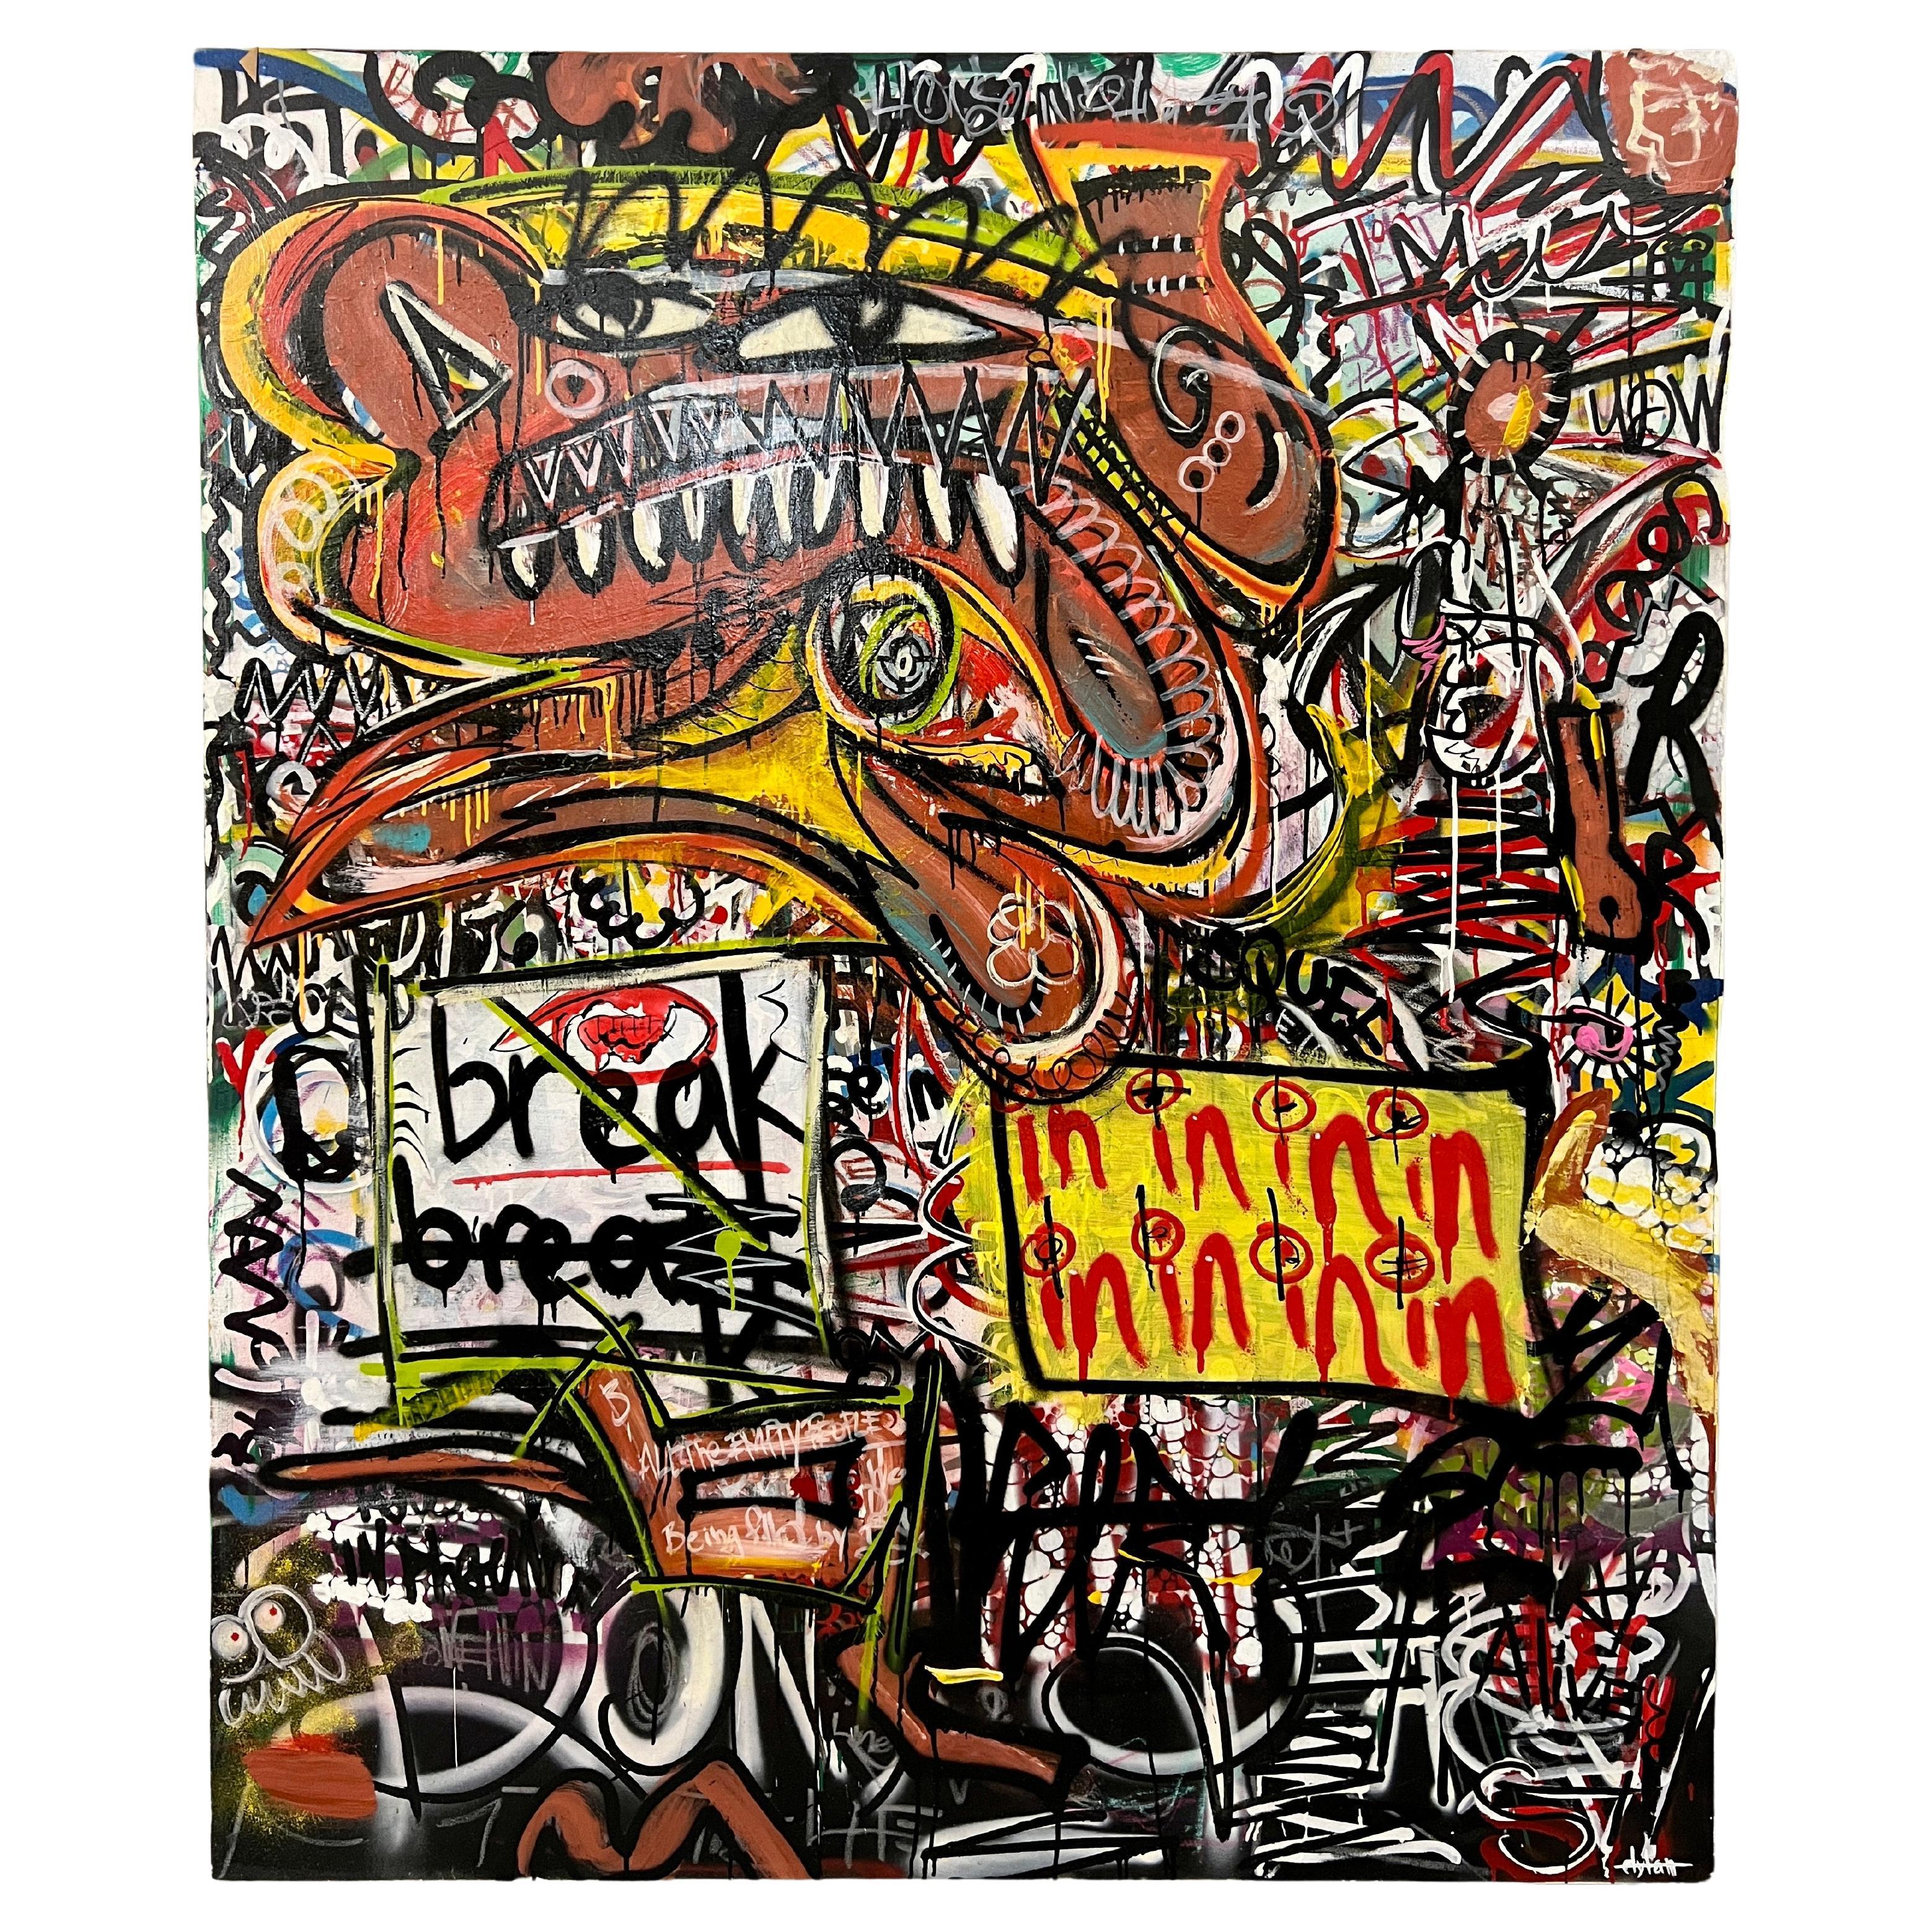 Oversized Graffiti Art on Canvas., "Spits Energy" by Dylan For Sale